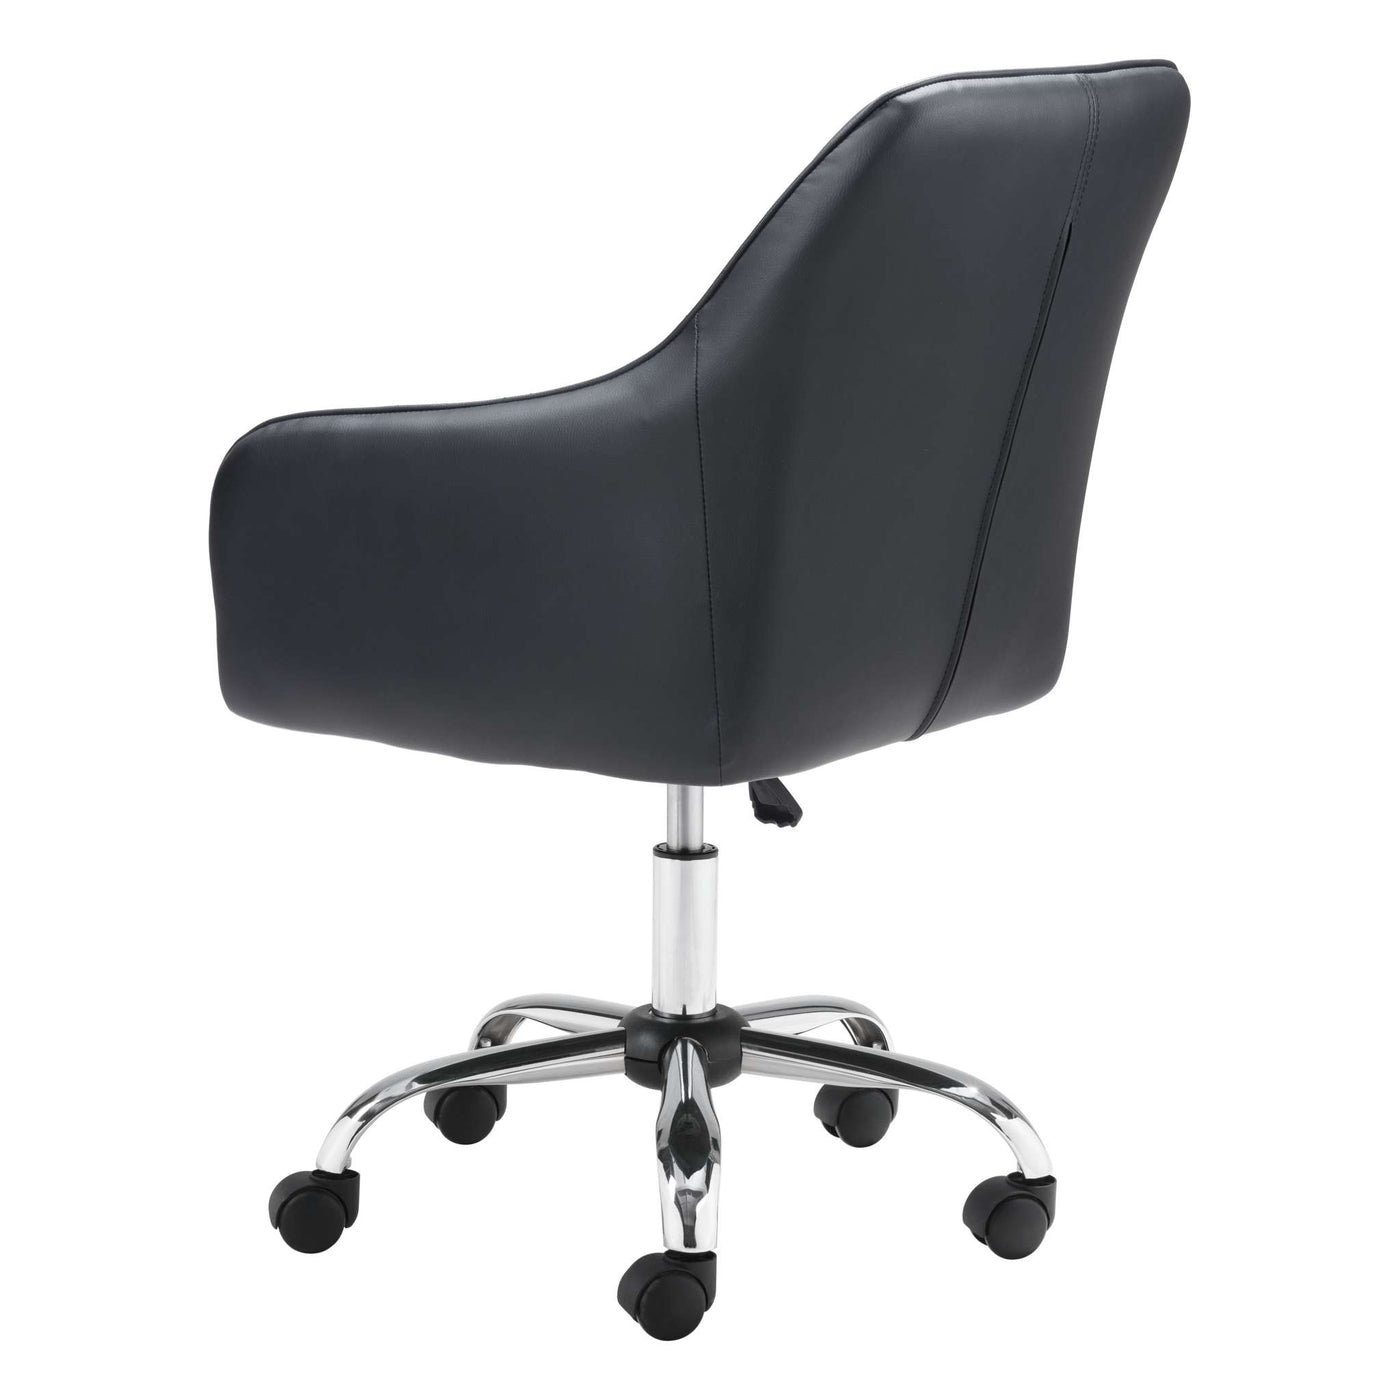 Zuo Mod Curator Office Chair